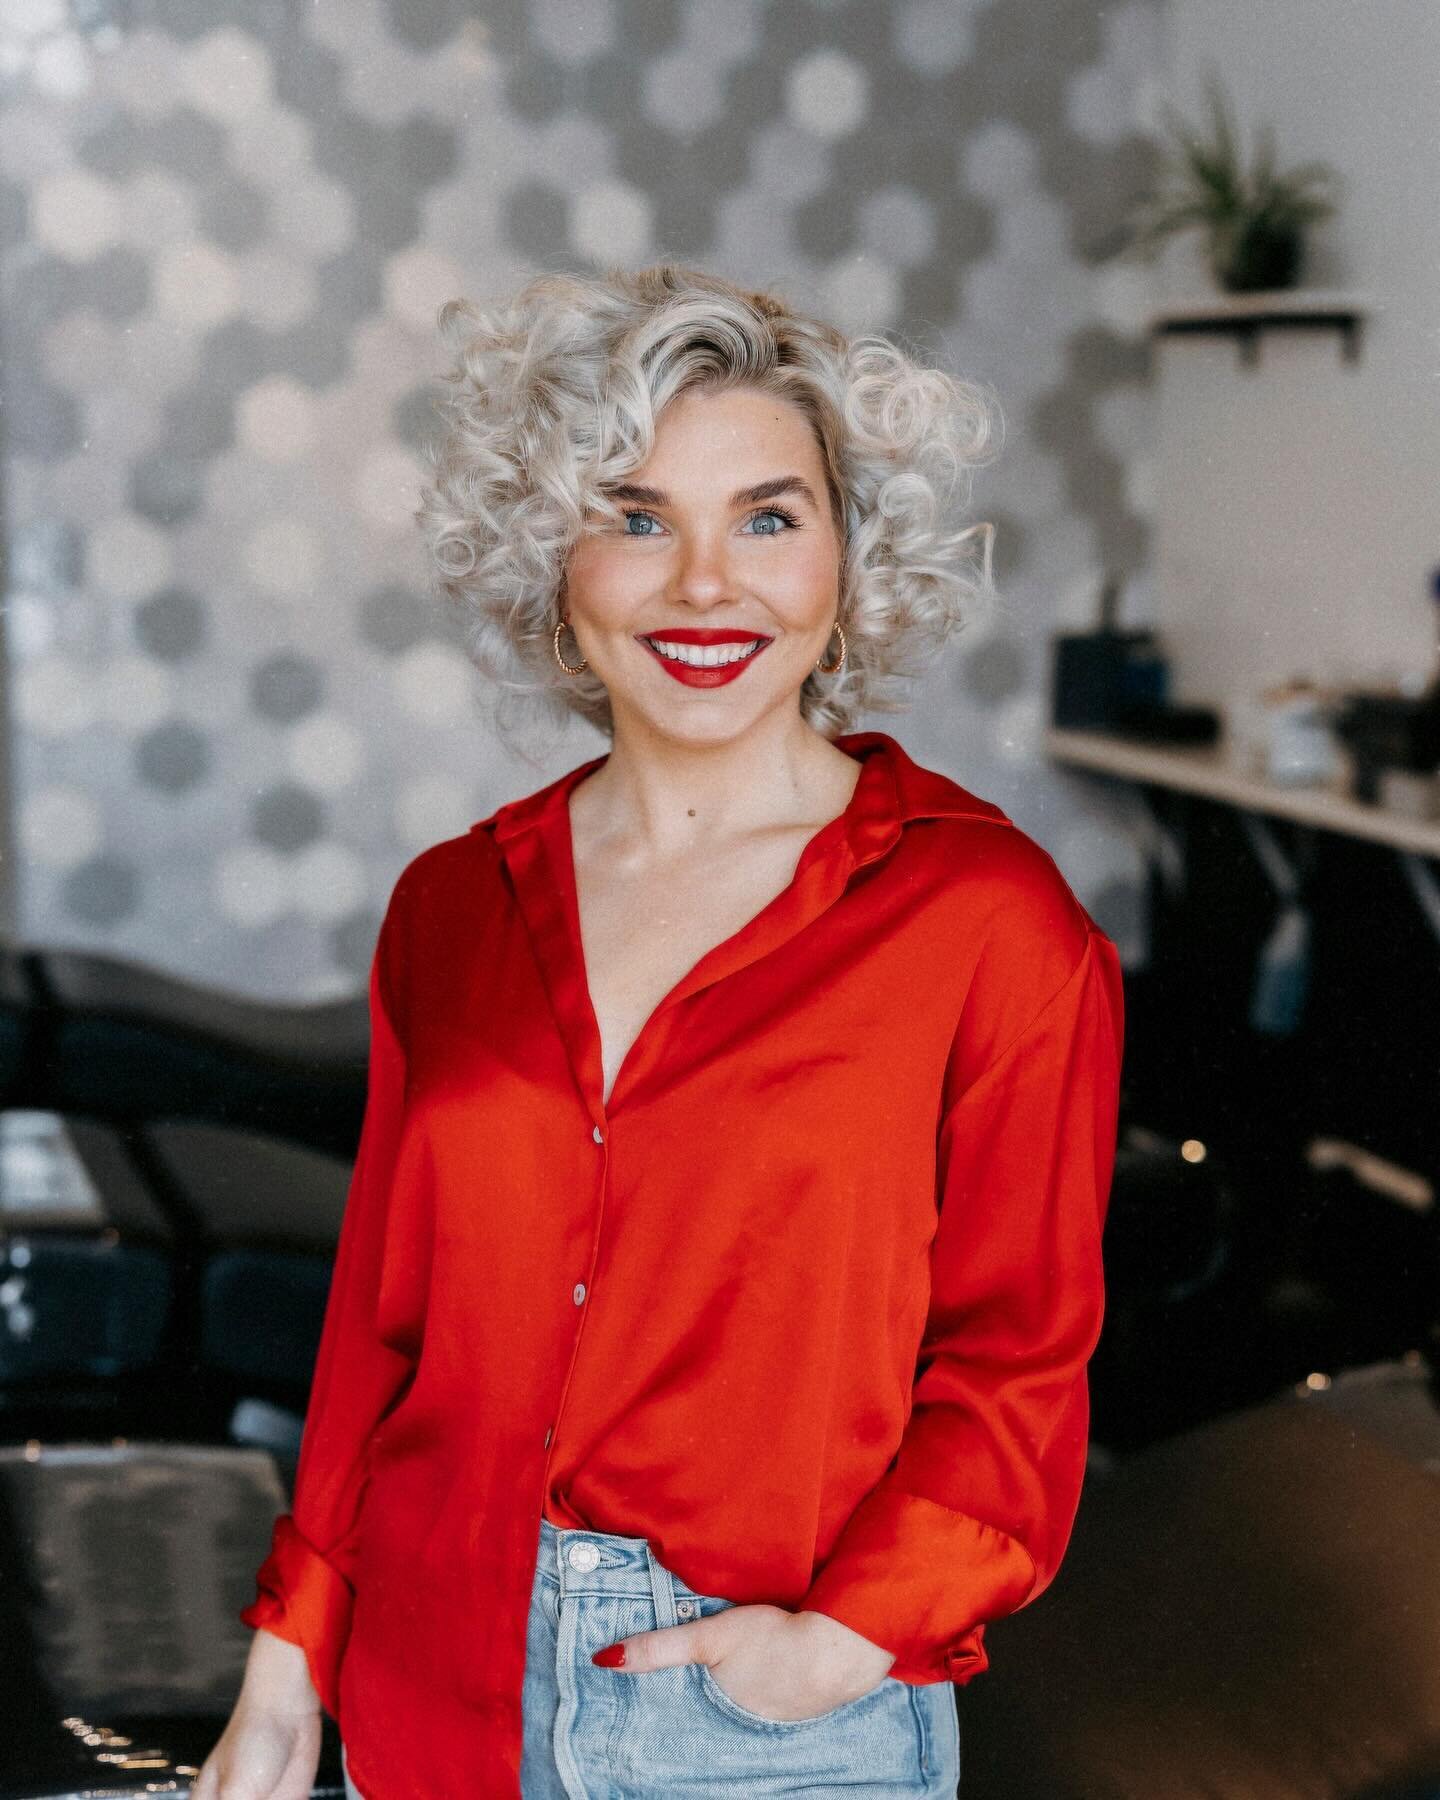 Happy Anniversary to Lindsay! We&rsquo;re celebrating 3 years of Lindsay&rsquo;s contributions to Brow Chic and her clients. Her positivity is one of her many strengths. She brings insight, mindfulness, and unparalleled service to each and every gues